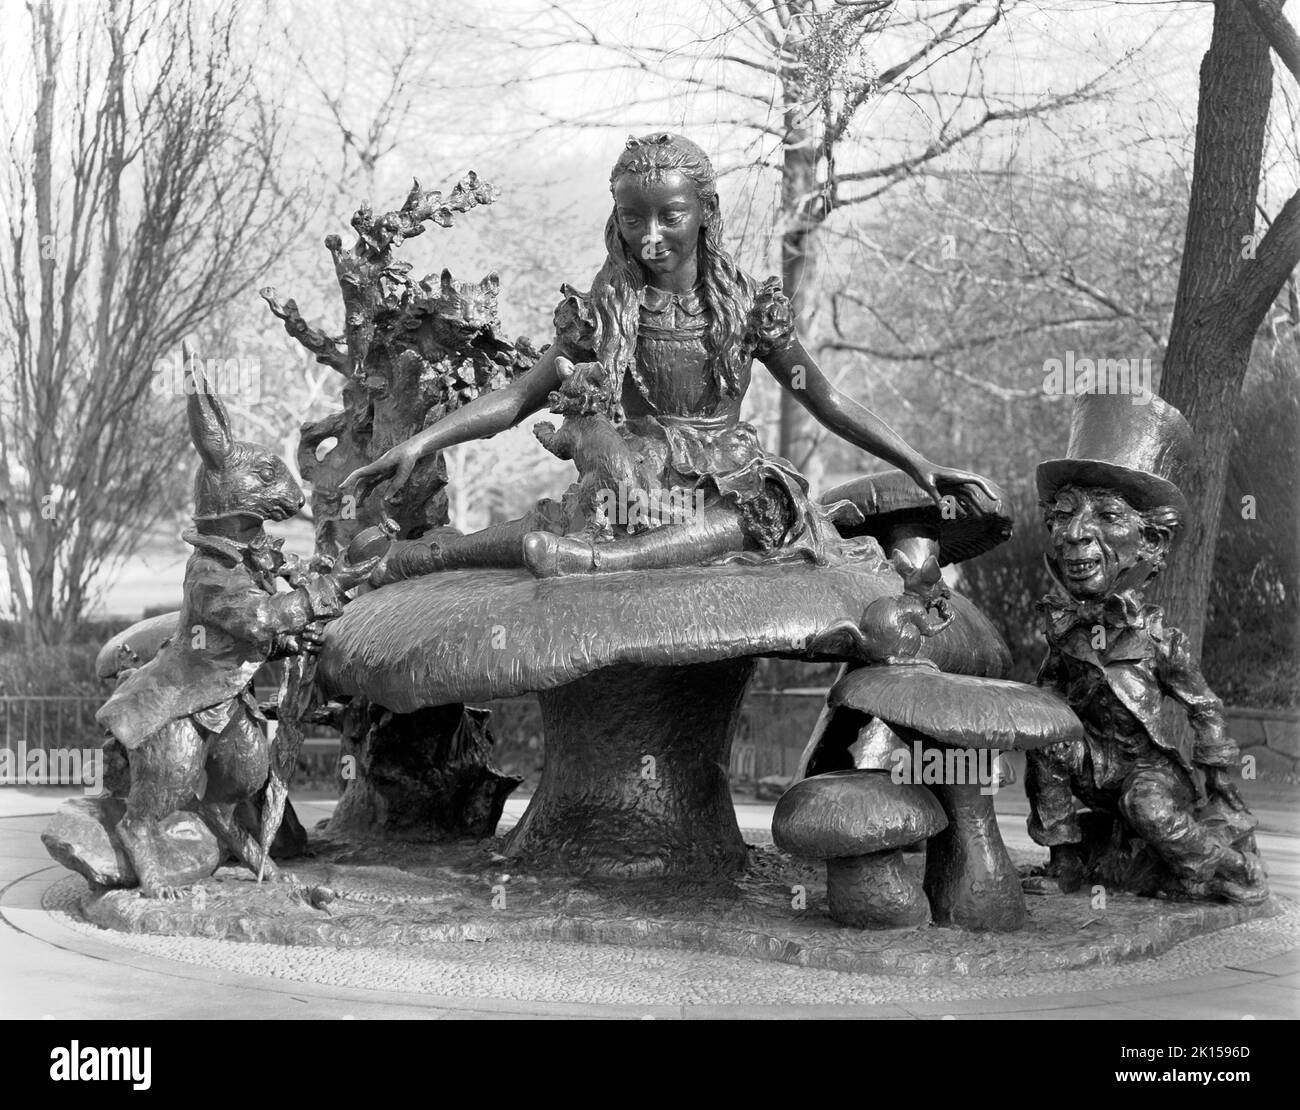 Alice in Wonderland statue in Central Park, New York City, USA.  Photographed in the winter, image was shot with a large film in Black & White Stock Photo